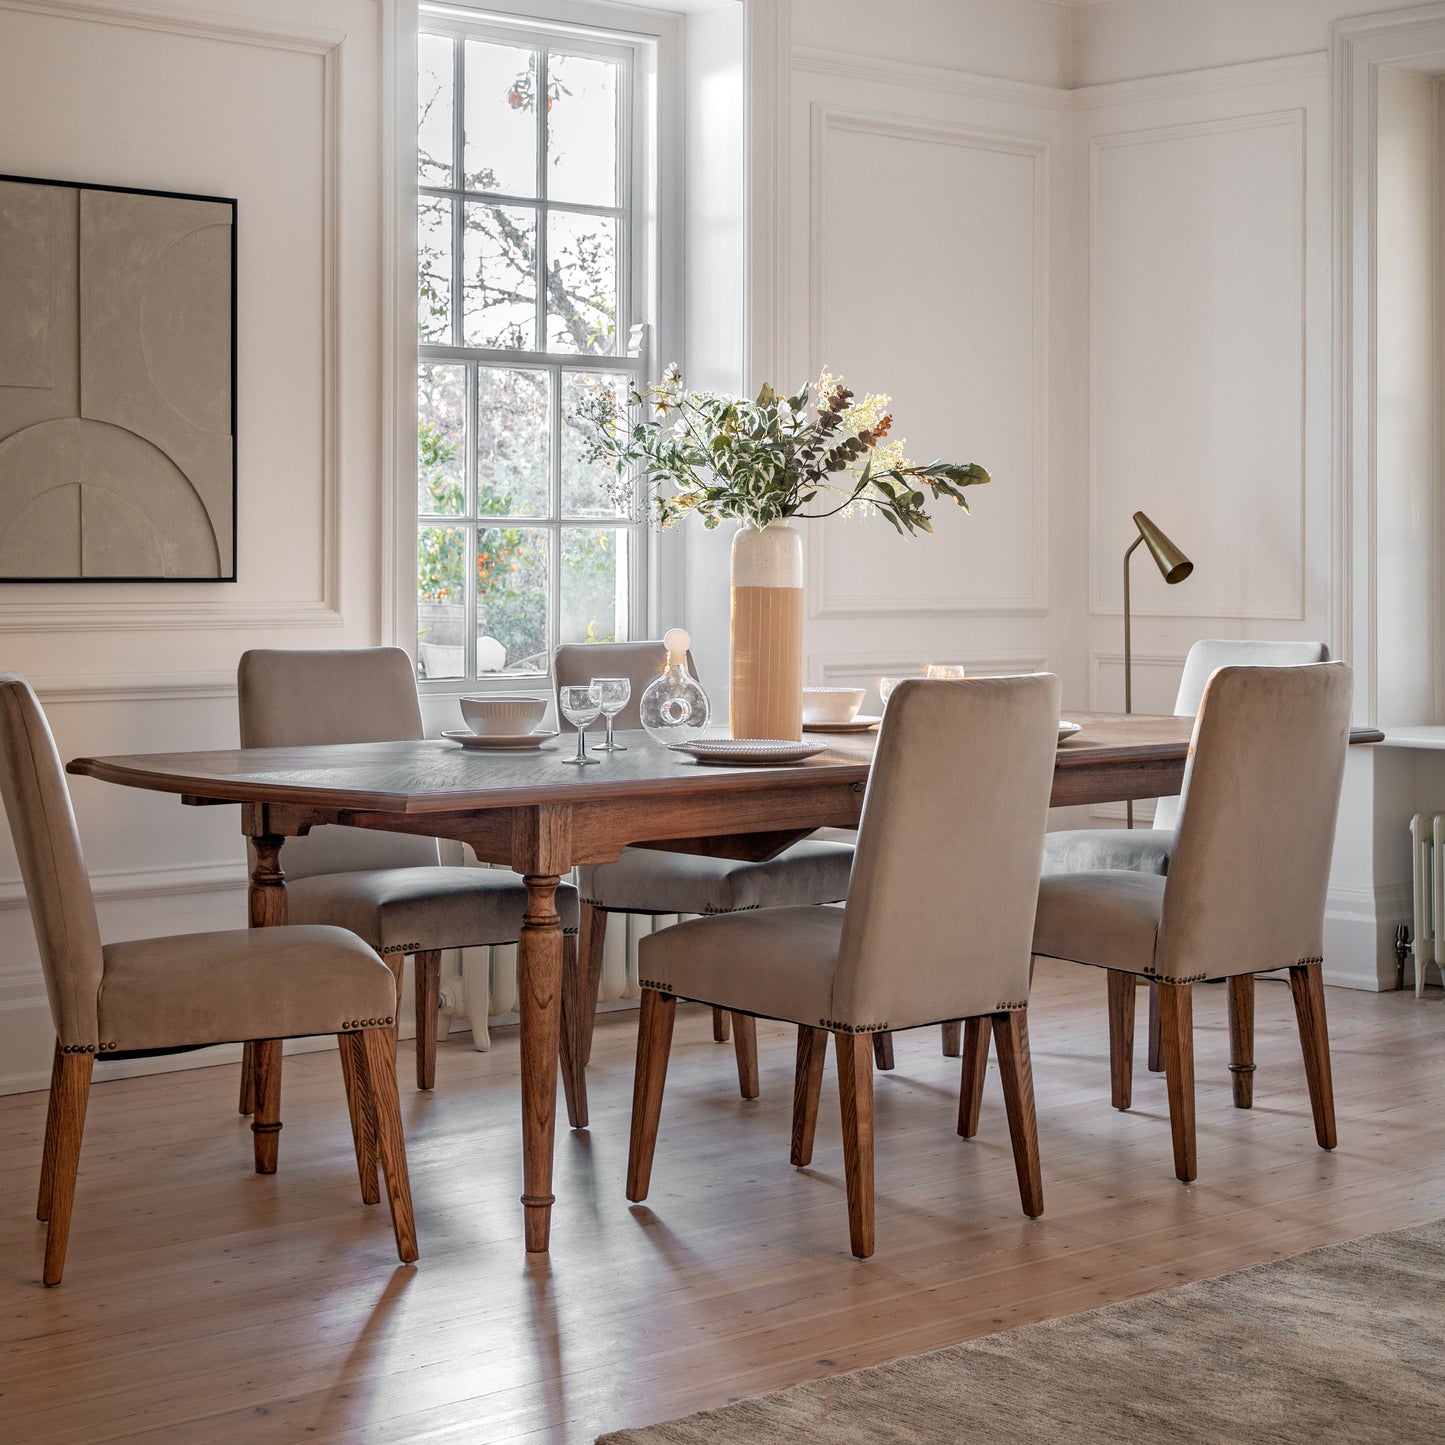 Load image into Gallery viewer, A dining room furnished with stylish home furniture from Kikiathome.co.uk, including the Sweaton Extending Dining Table and chairs.
